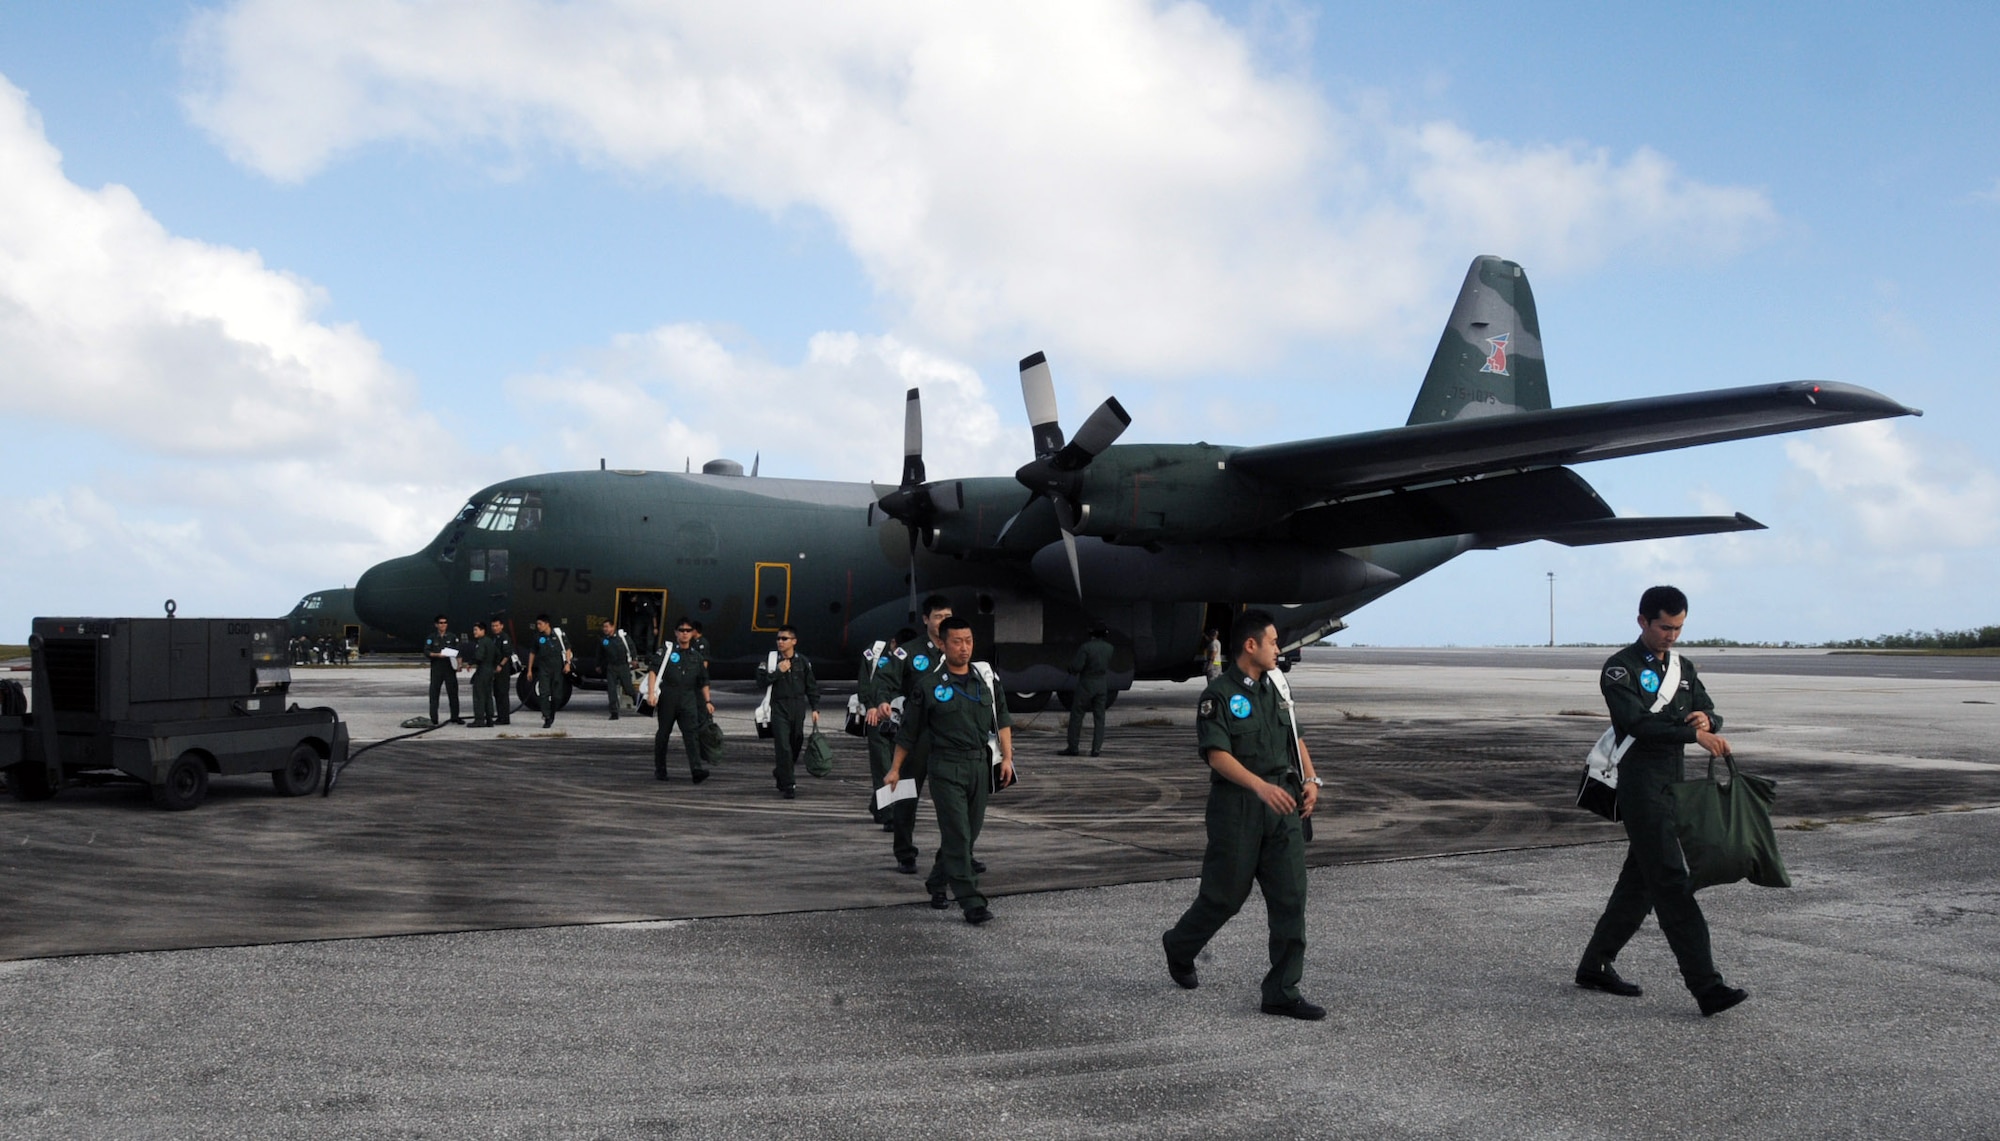 Japan Air Self Defense Force members offload from a C-130 after arriving Jan. 27 at Andersen Air Force Base, Guam. More than 60 JASDF members arrived in three C-130s to participate in Exercise Cope North 09-1, a regularly scheduled exercise scheduled for Feb. 2 through 13. Cope North is designed to enhance U.S. and Japanese air operations in defense of Japan. (U.S. Air Force photo/Senior Airman Ryan Whitney) 
